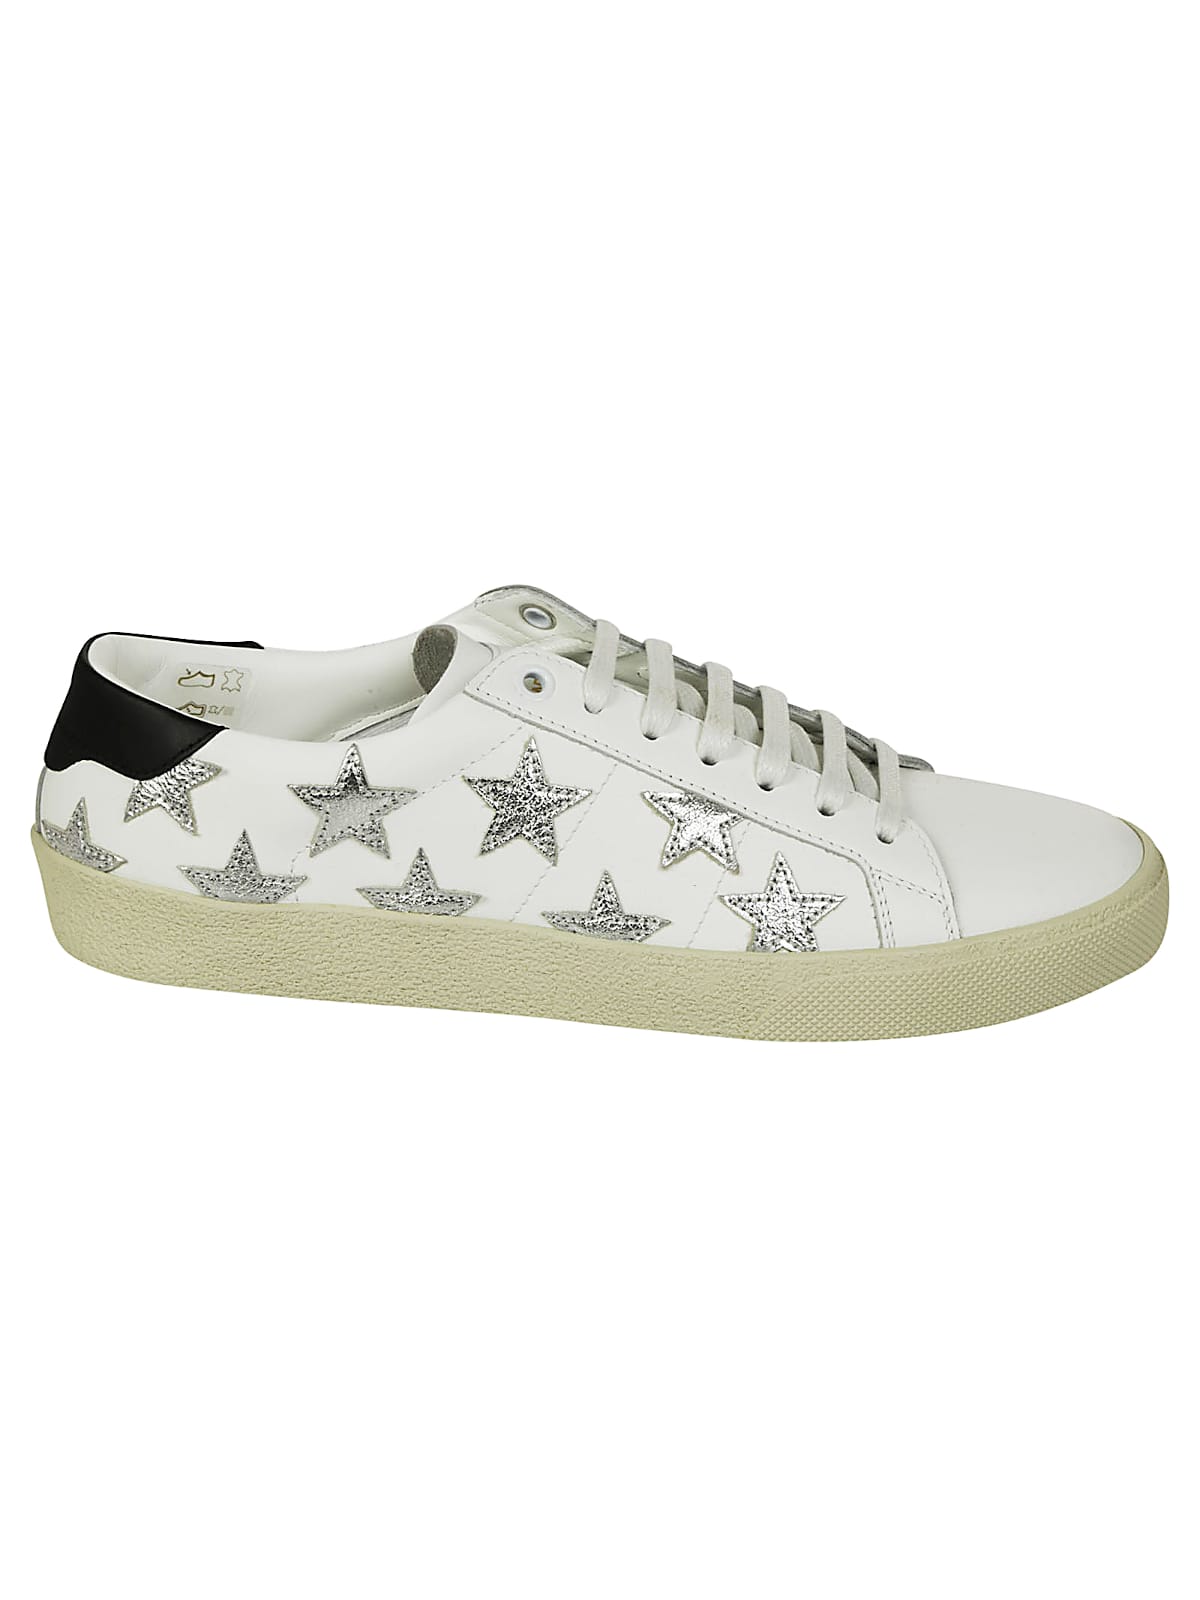 Buy Saint Laurent Signature California Stars Sneakers Flat Heel Leather Up online, shop Saint Laurent shoes with free shipping